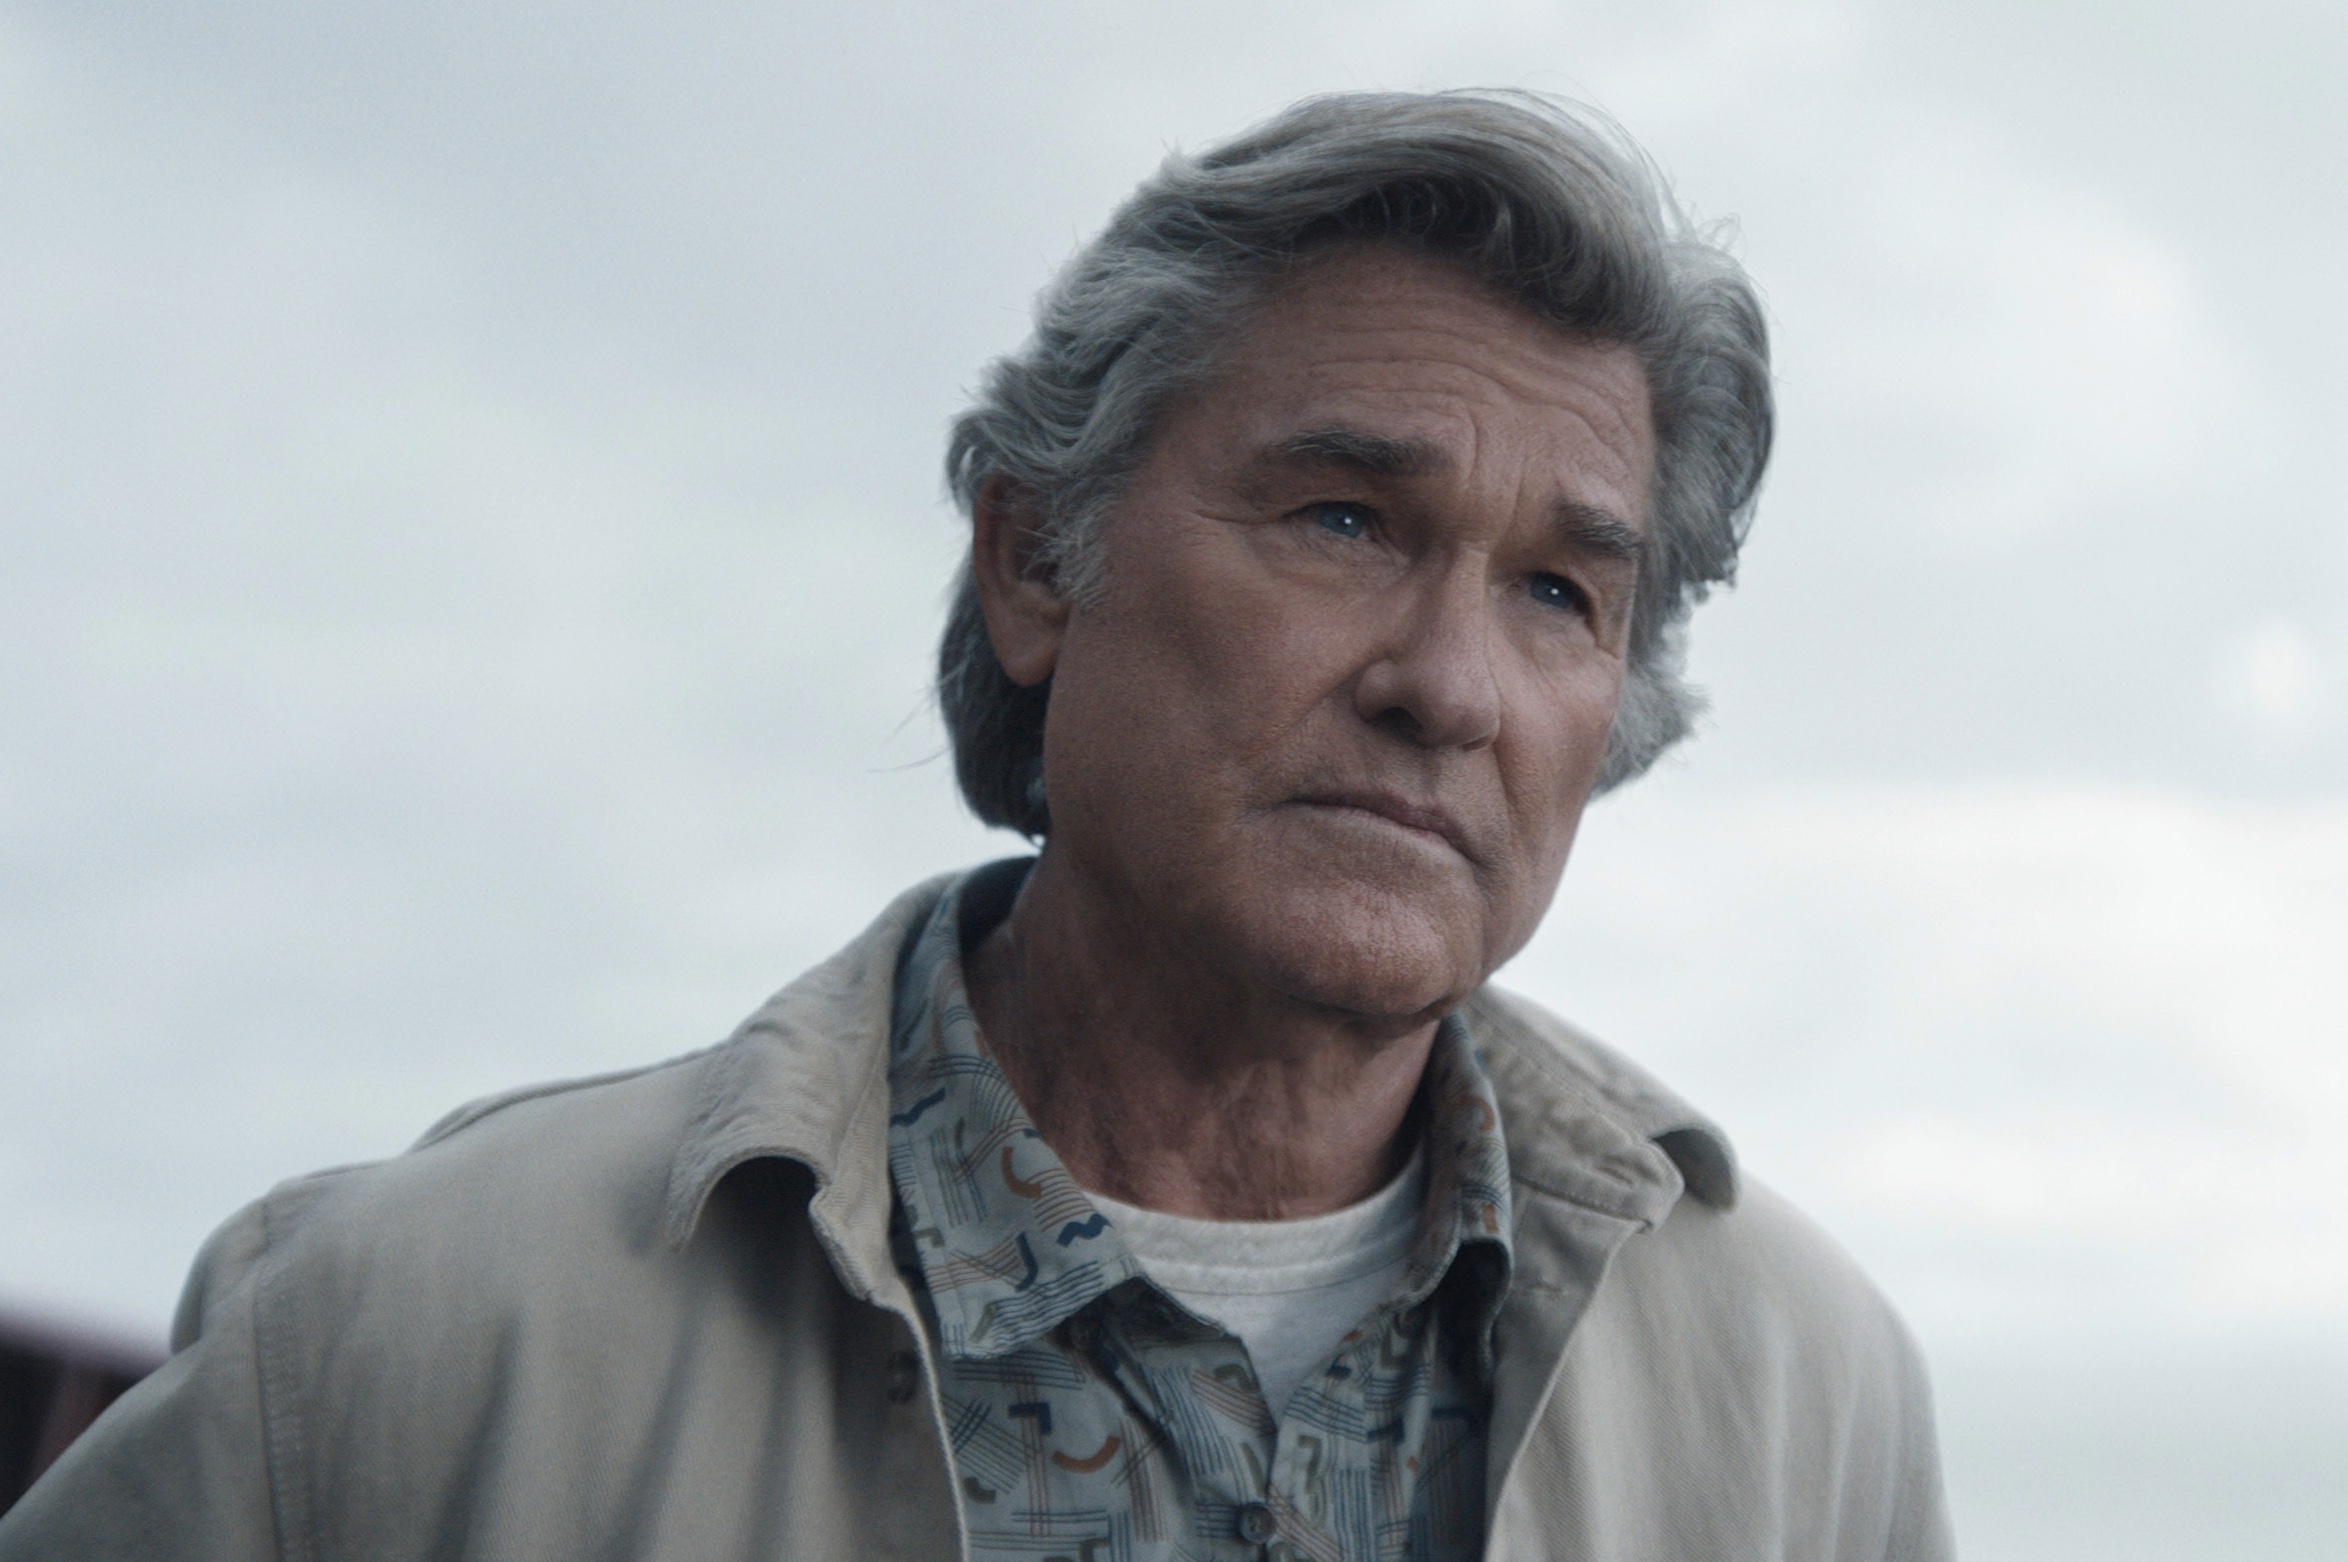 Monarch: Legacy of Monsters Cast on Apple TV+ - Kurt Russell as Lee Shaw